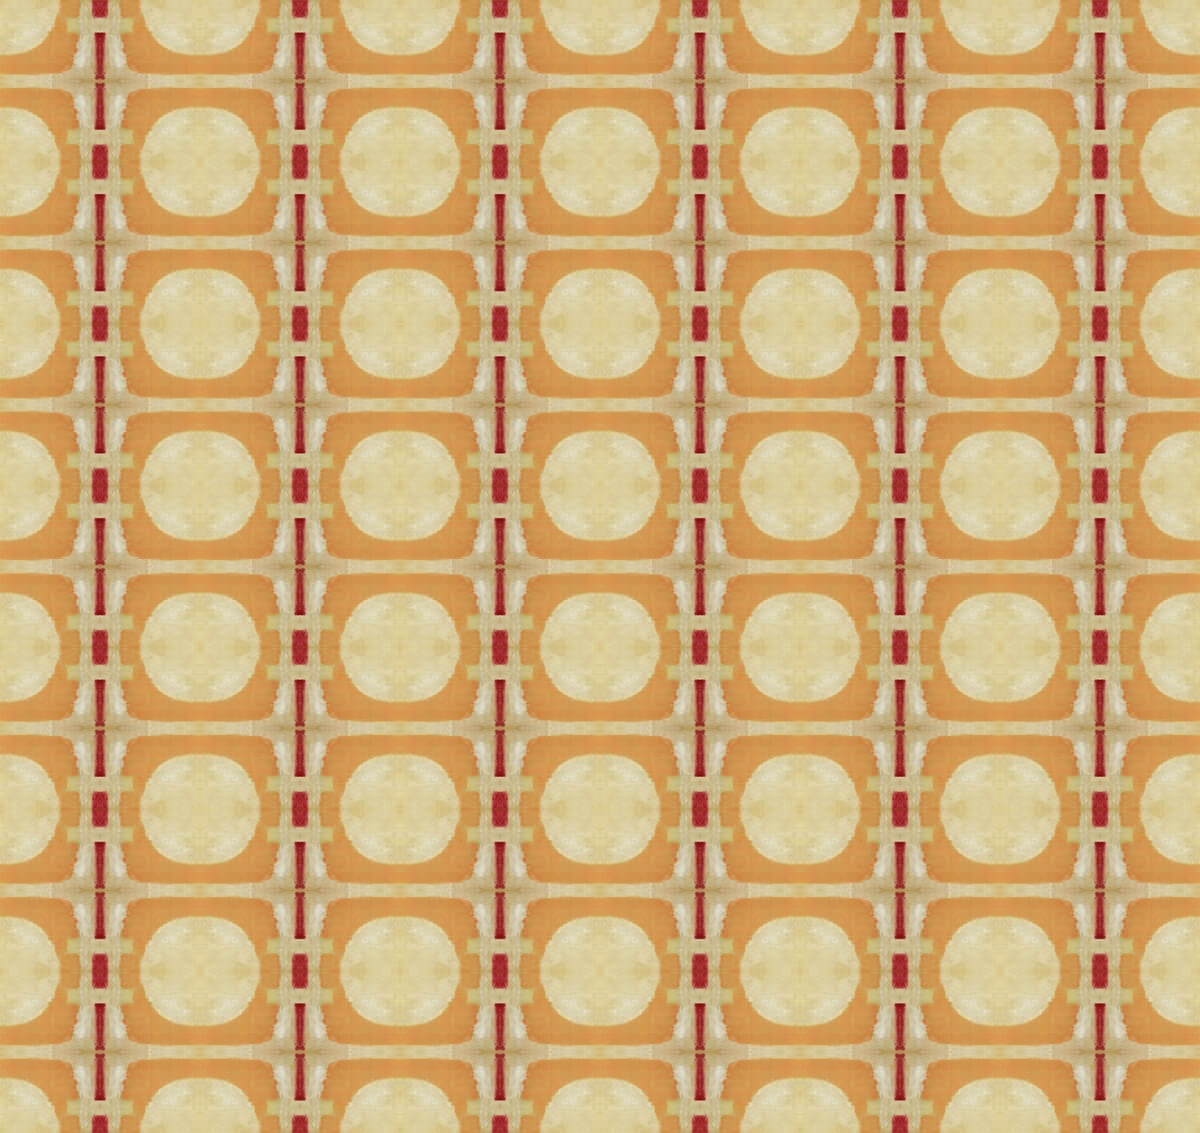 Floating Circles II pattern in pale yellow, brown, and red